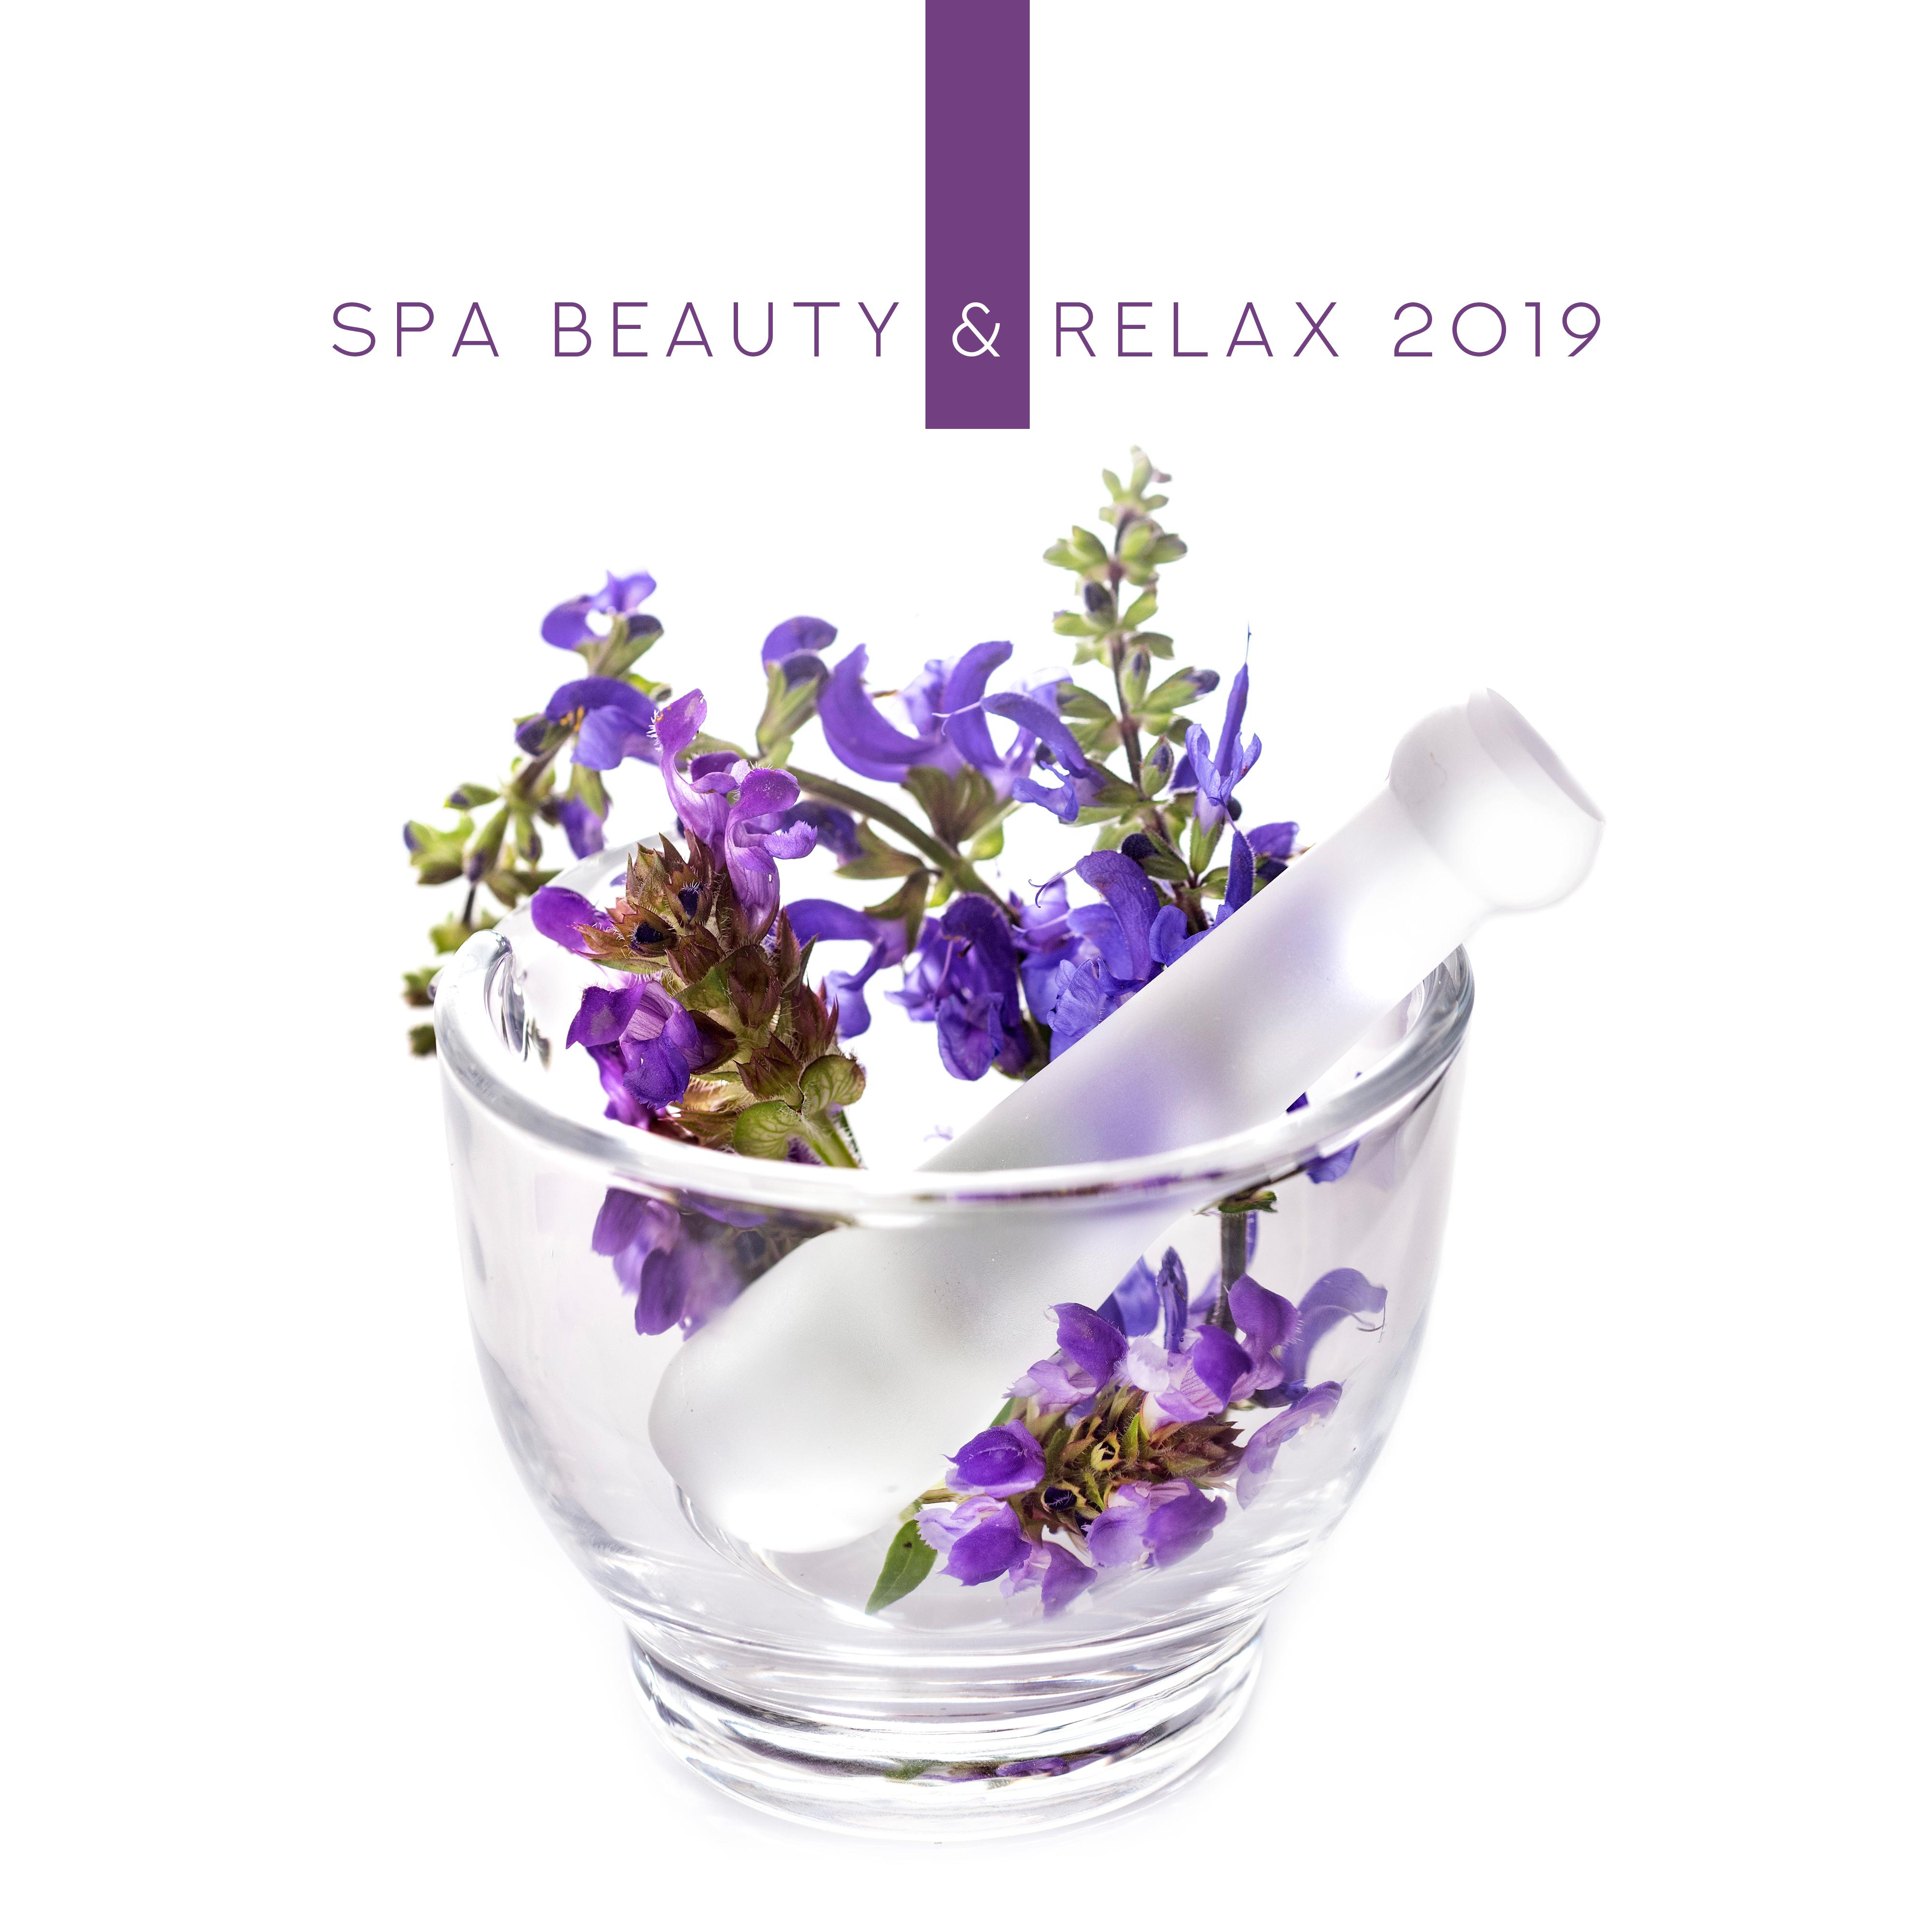 Spa Beauty & Relax 2019: 15 New Age Songs for Wellness, Massage, Pure Relaxation